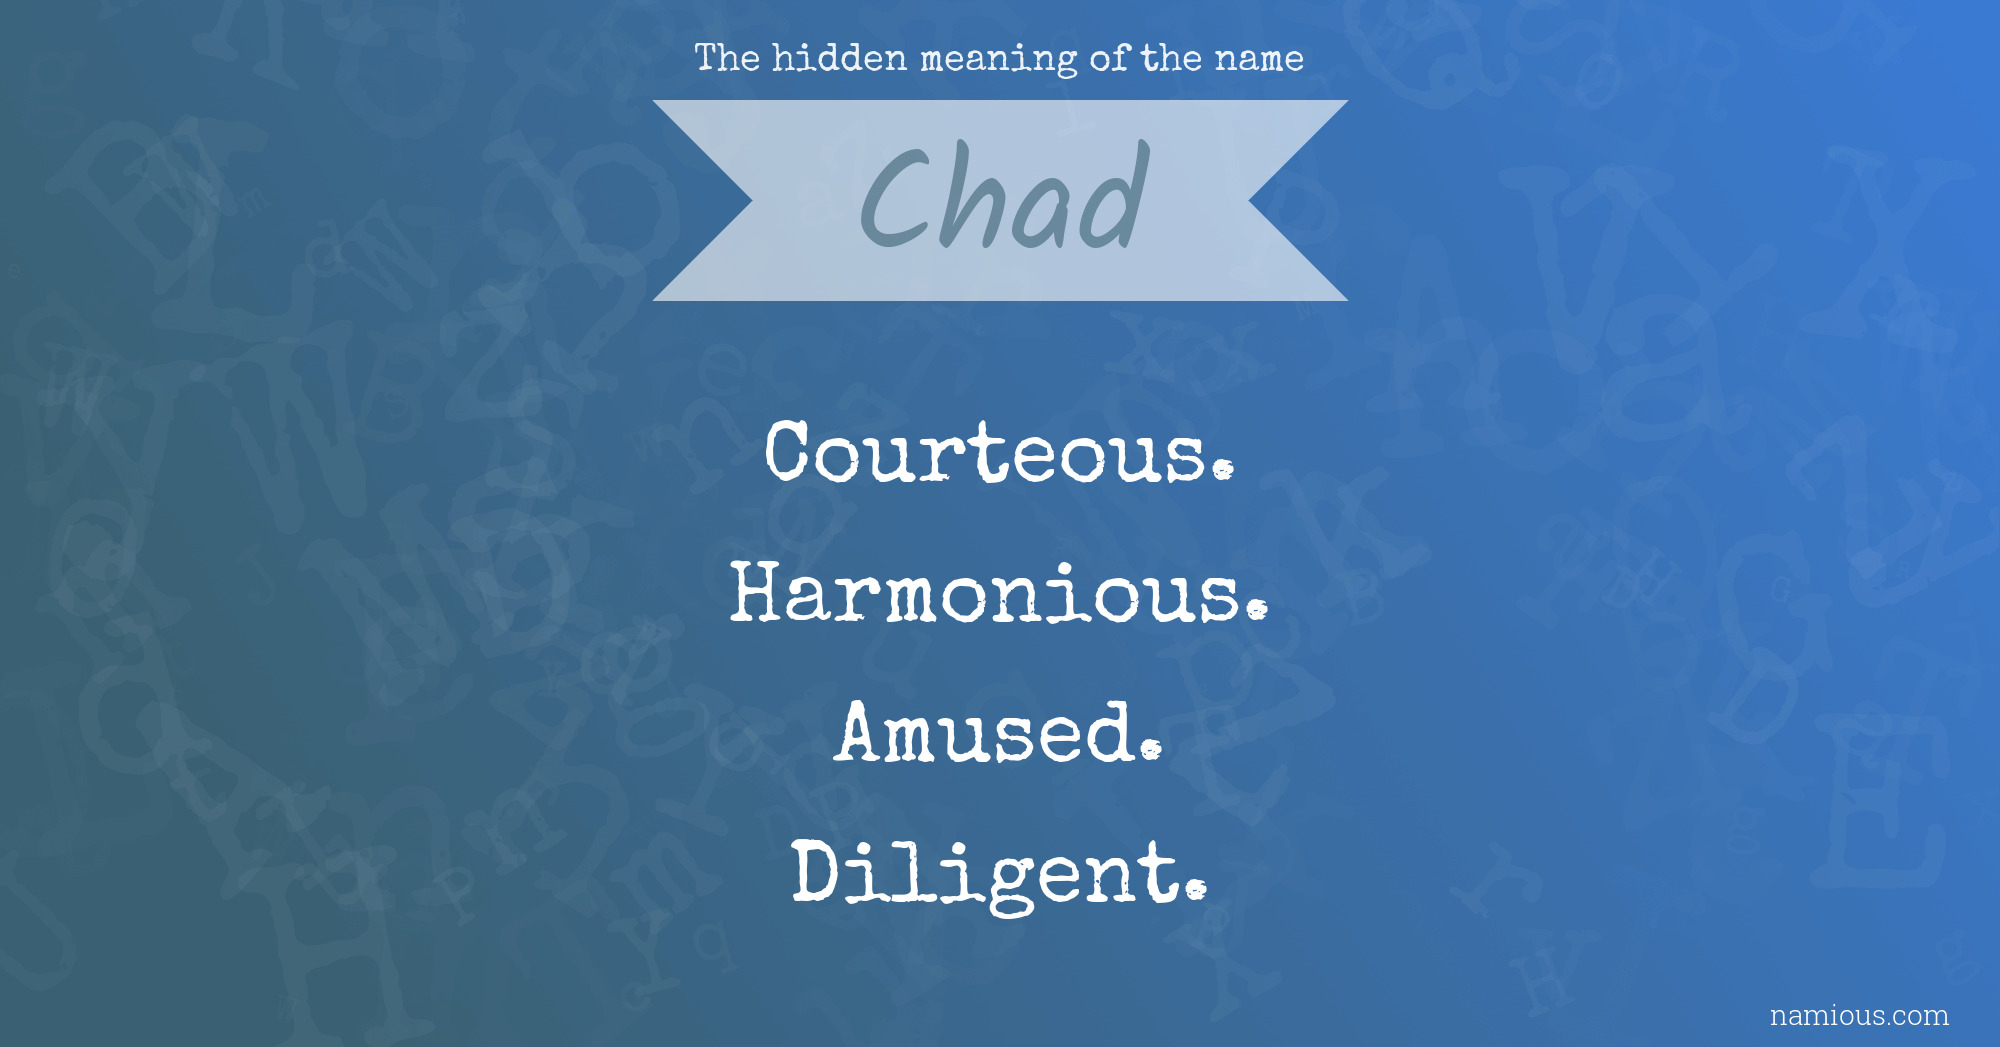 The hidden meaning of the name Chad